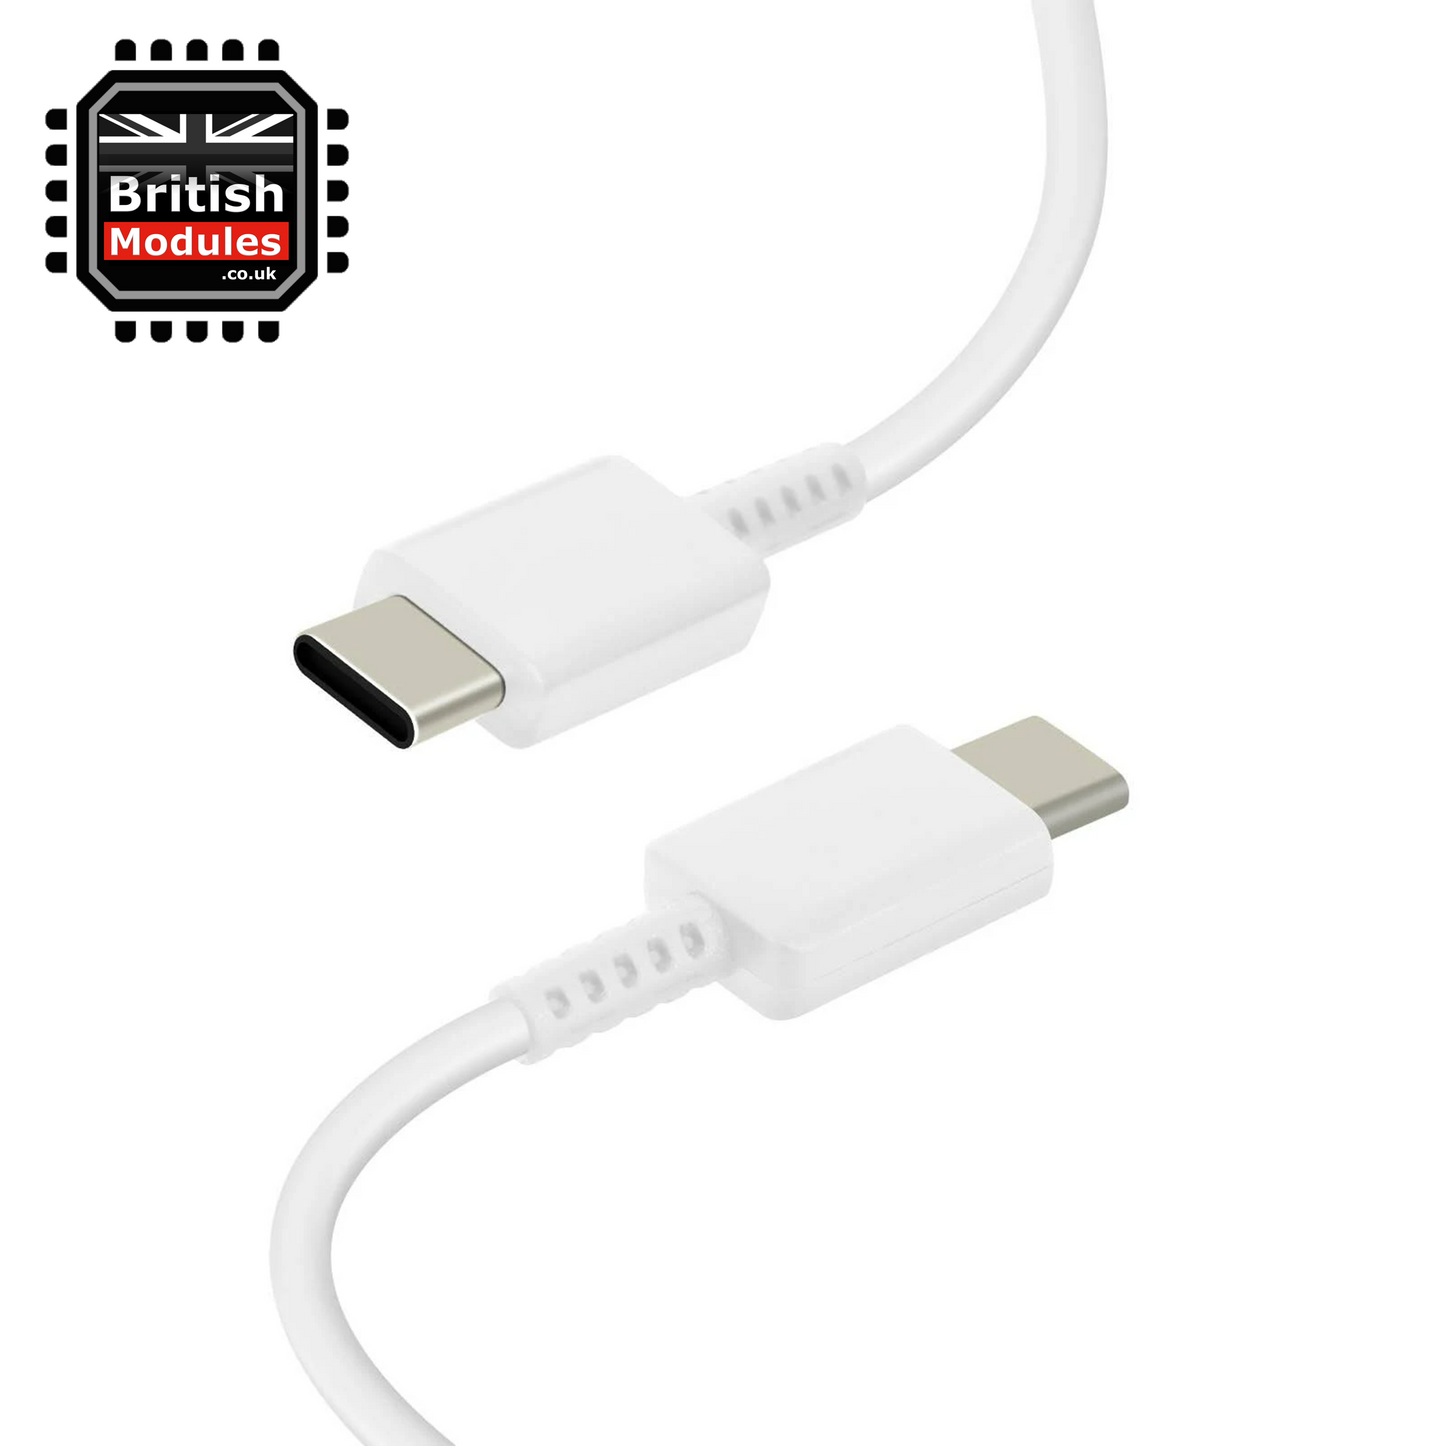 Samsung USB-C to USB-C Cable 1M White